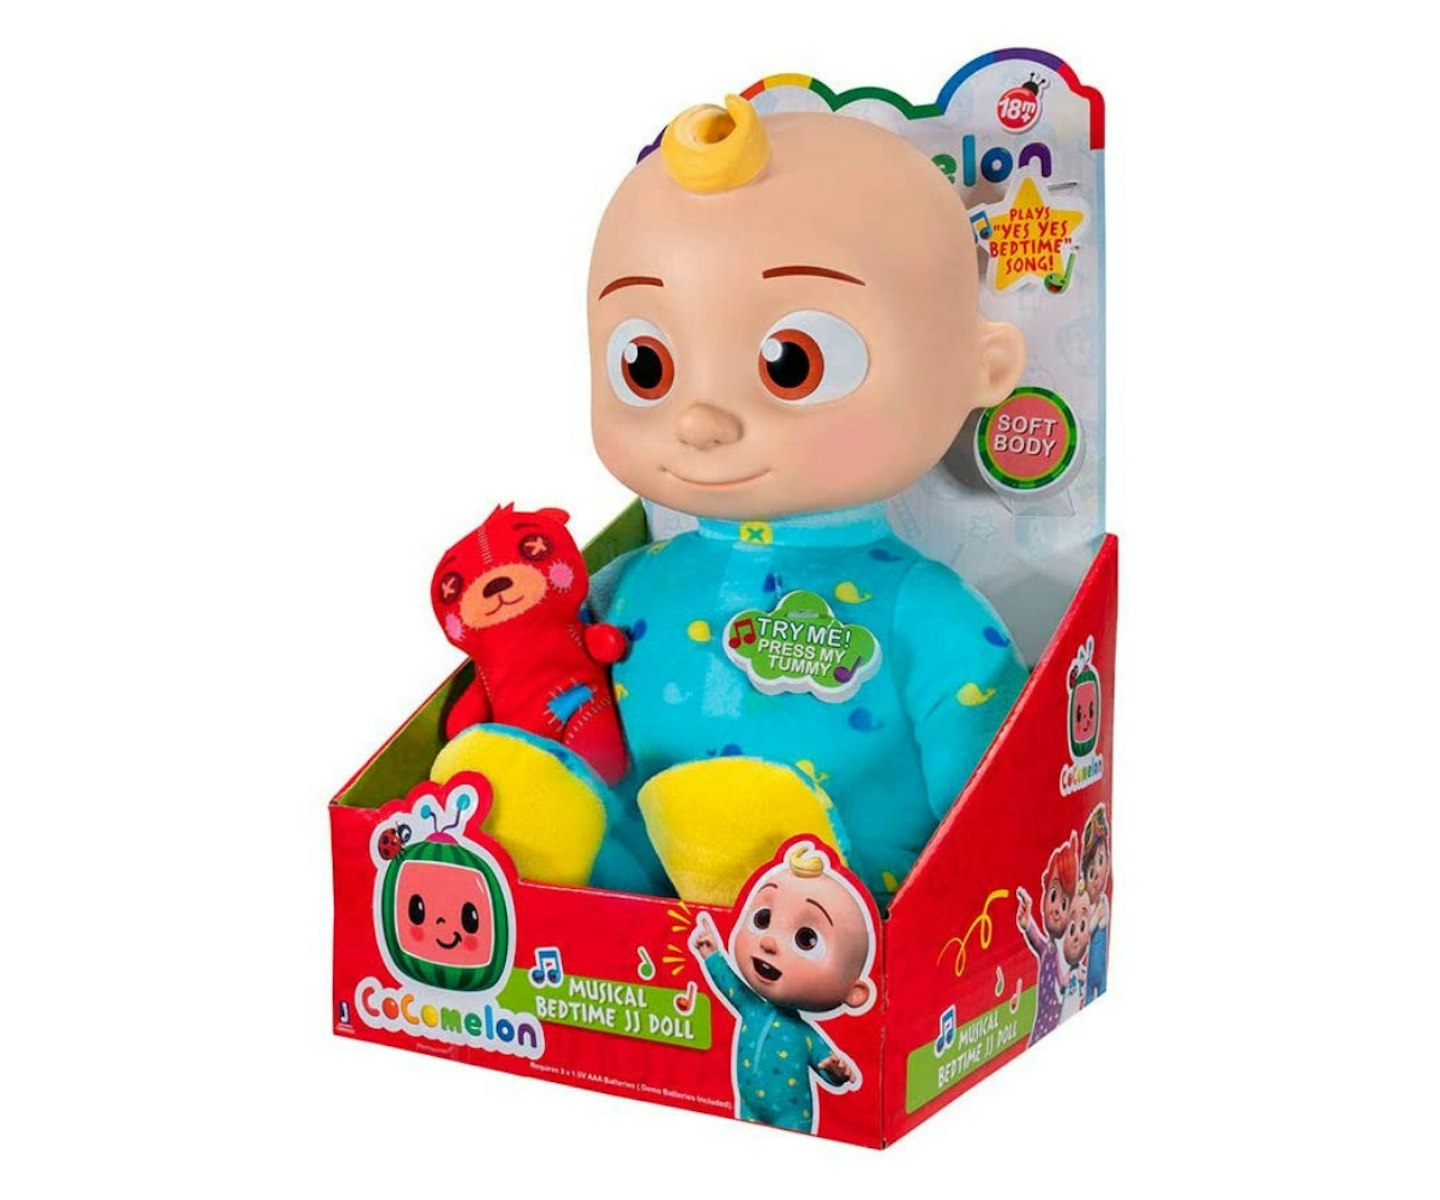 cocomelon toys for babies